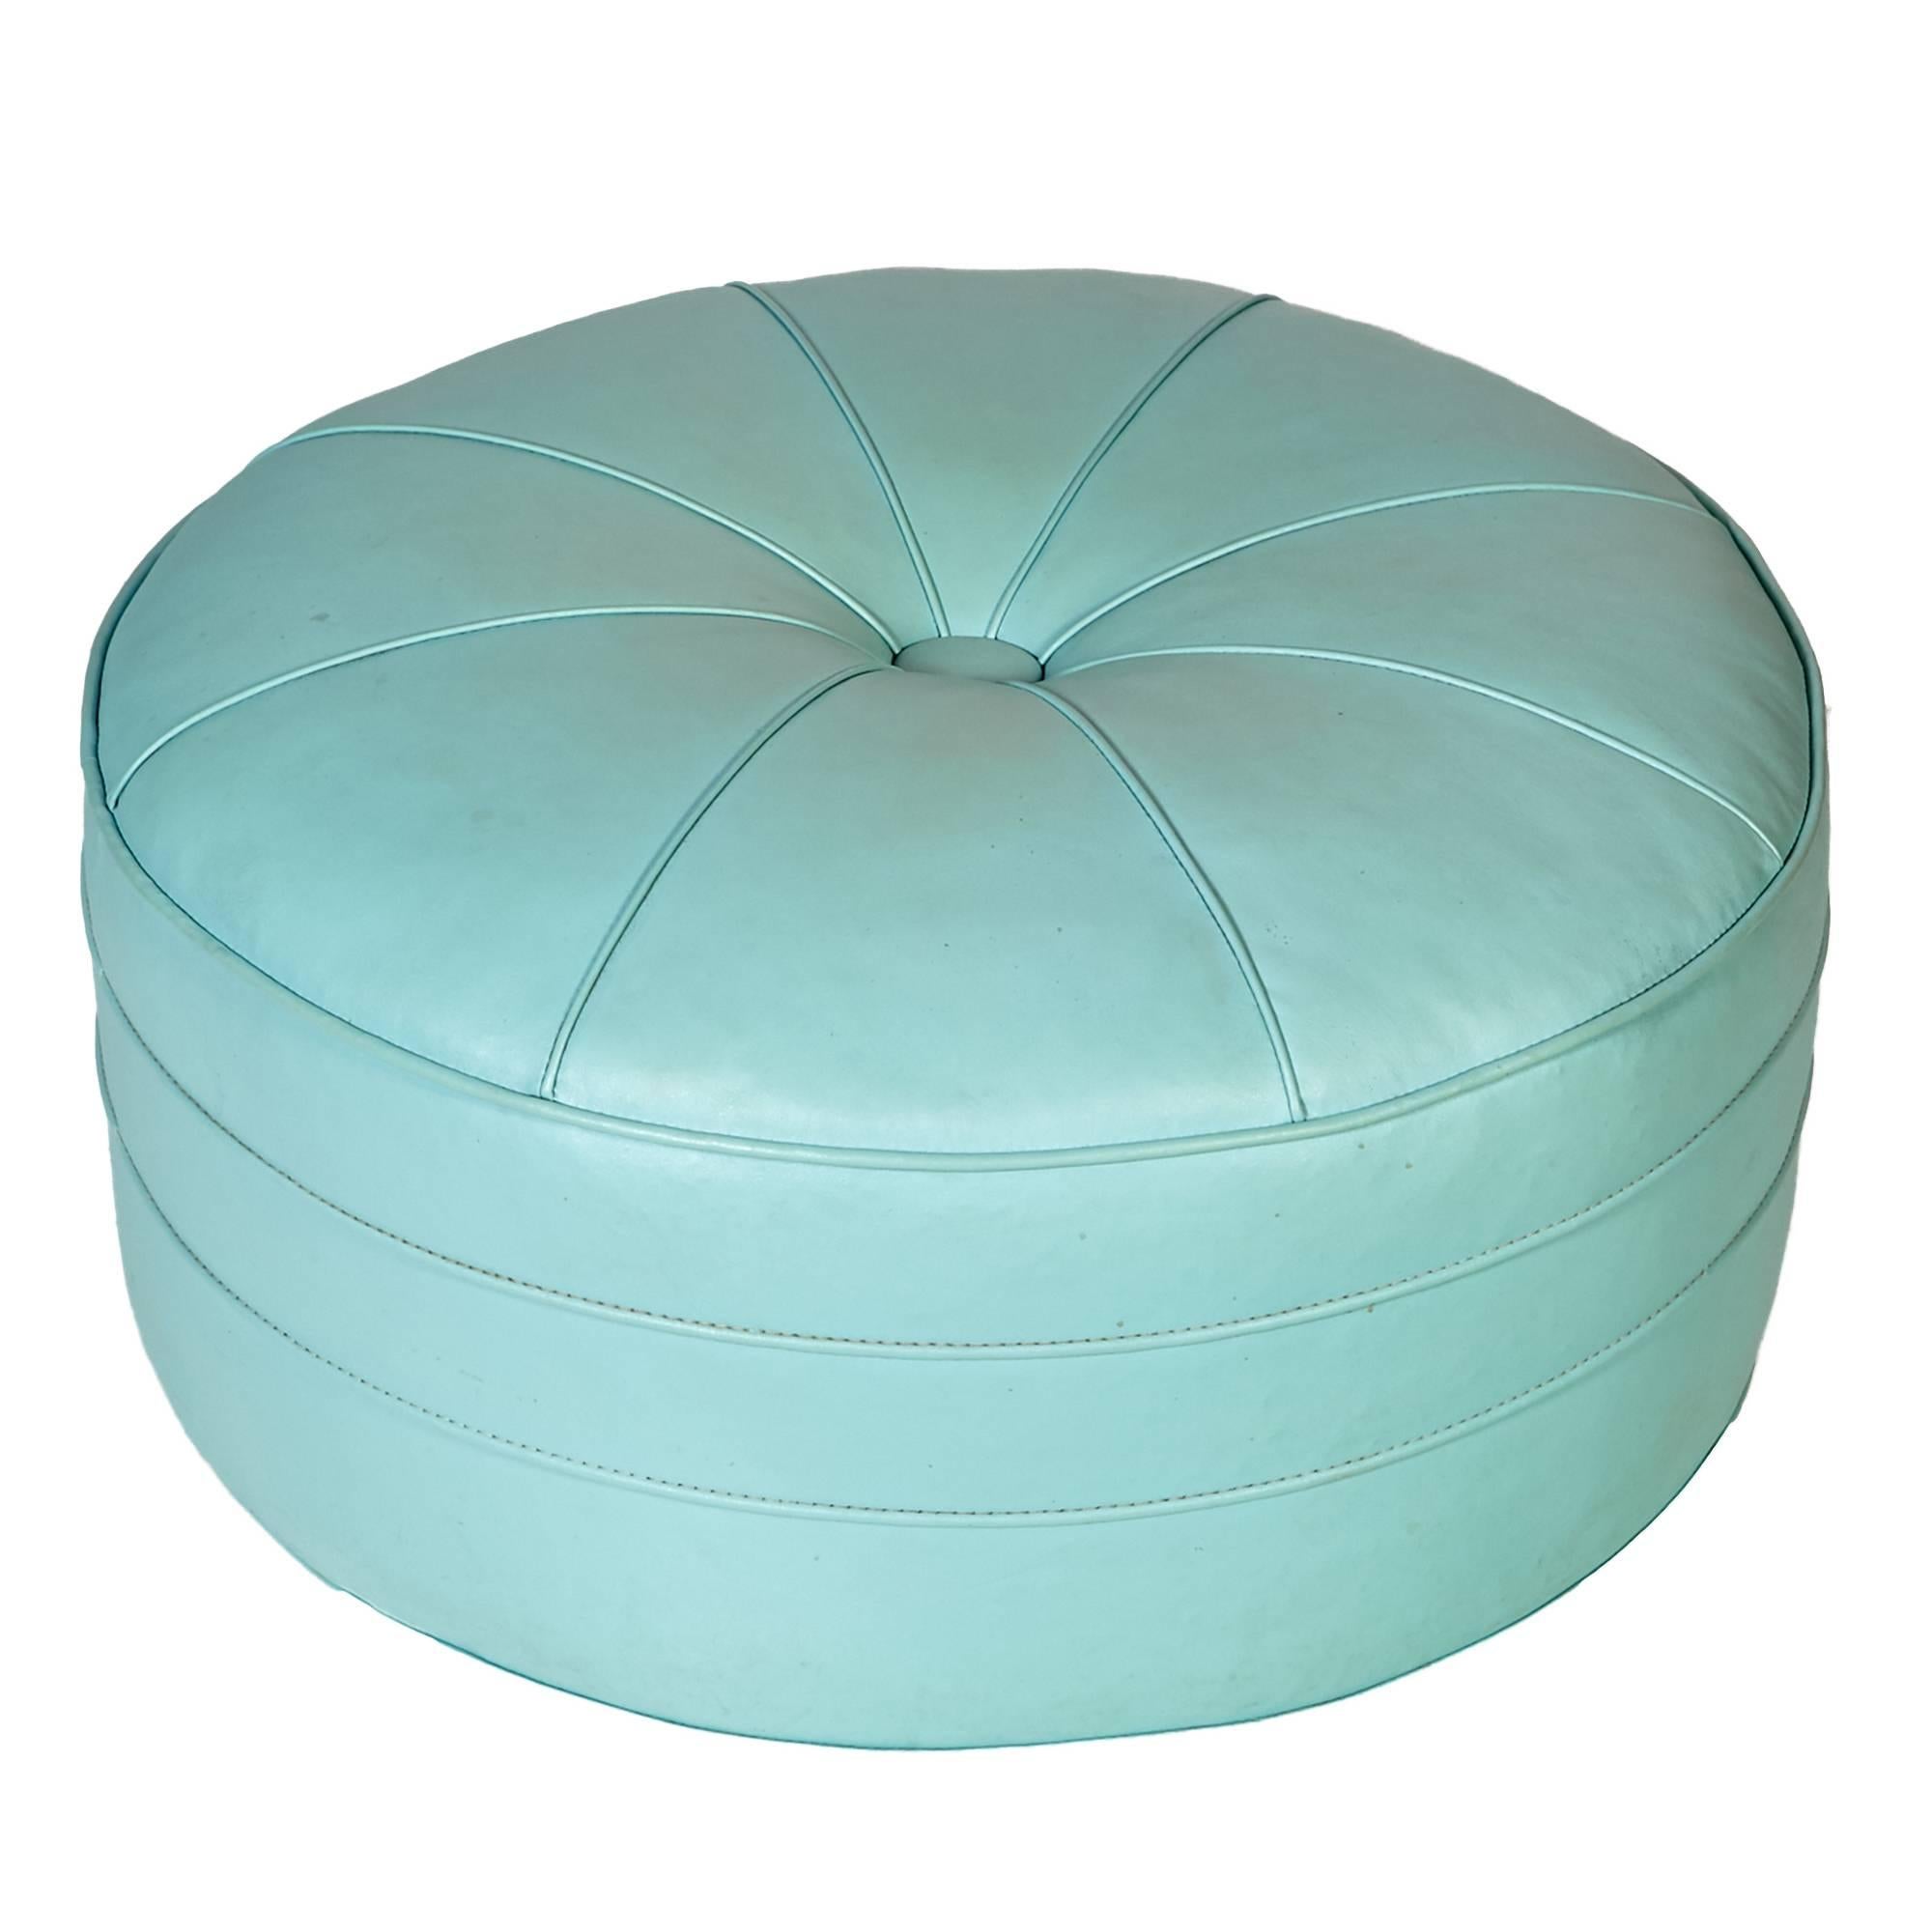 1960s oversized round turquoise Naugahyde tufted pouf/ottoman. Excellent condition. Unmarked.